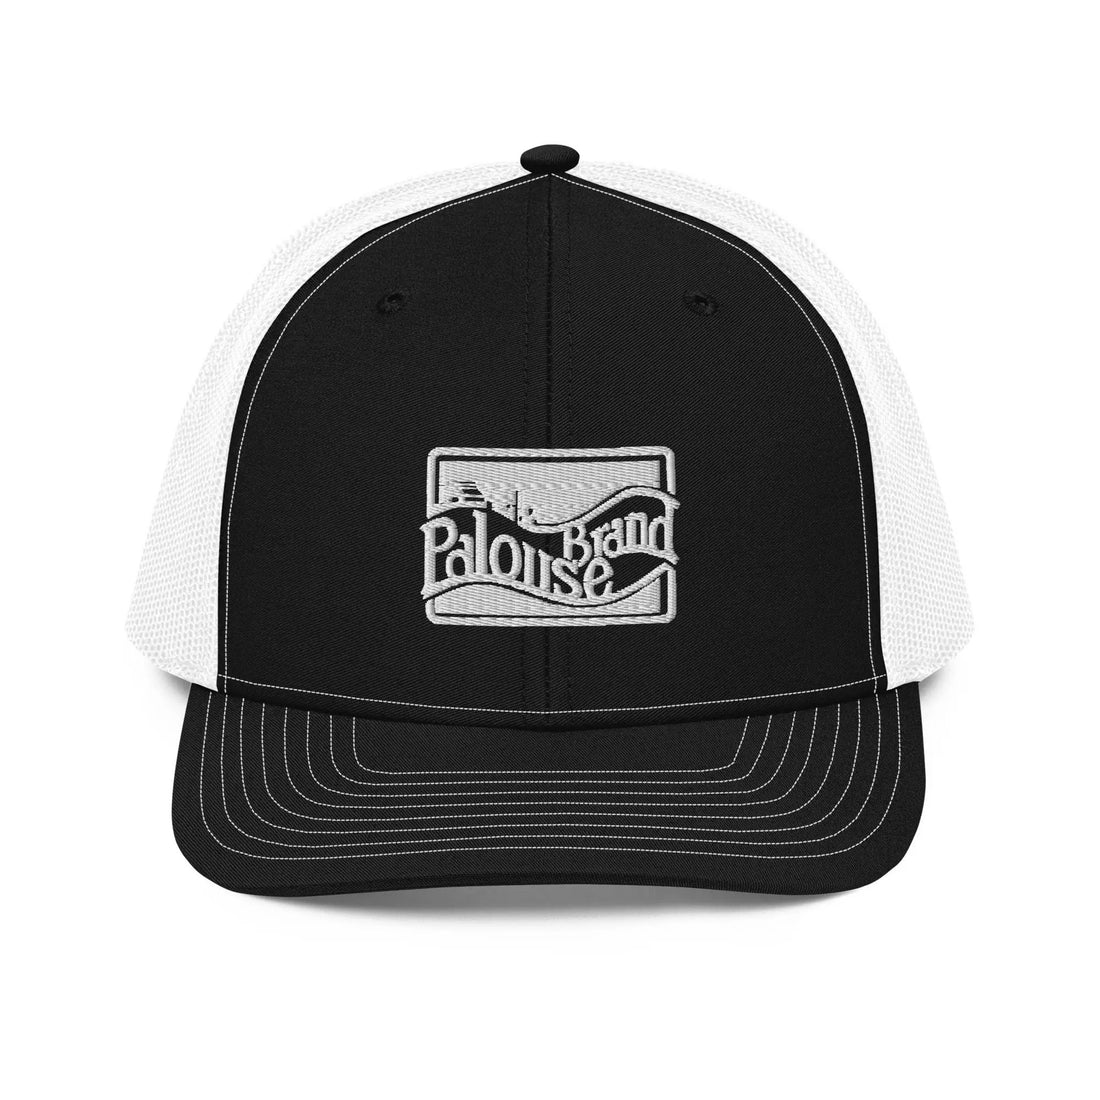 a black and white trucker hat with the logo of a band